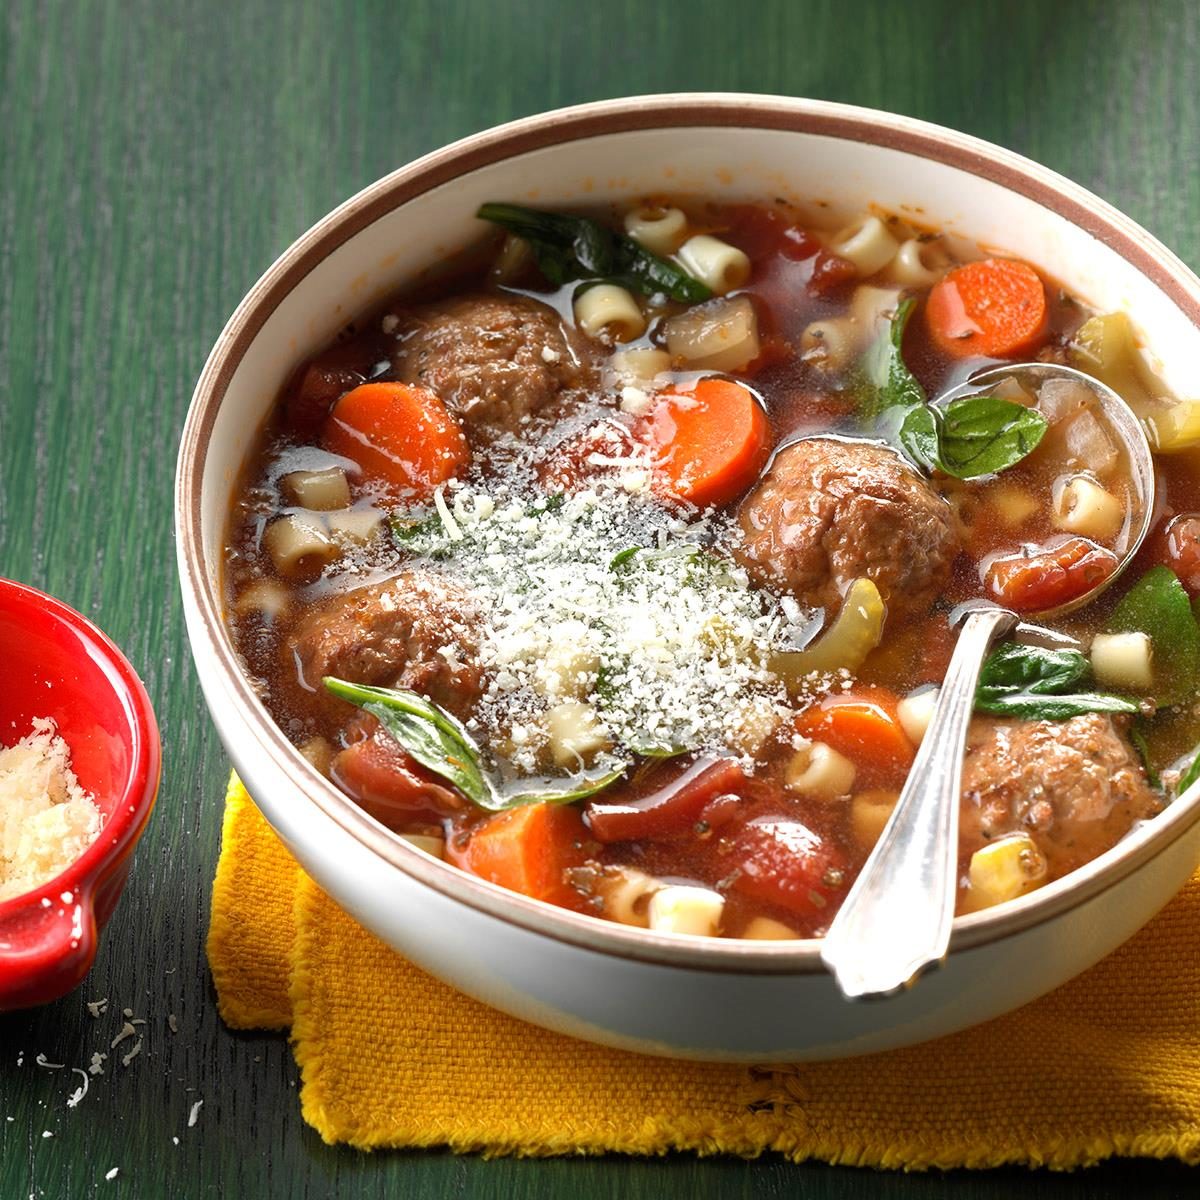 Slow Cooked Meatball Soup Exps Scscbz17 73242 C03 21 1b 18